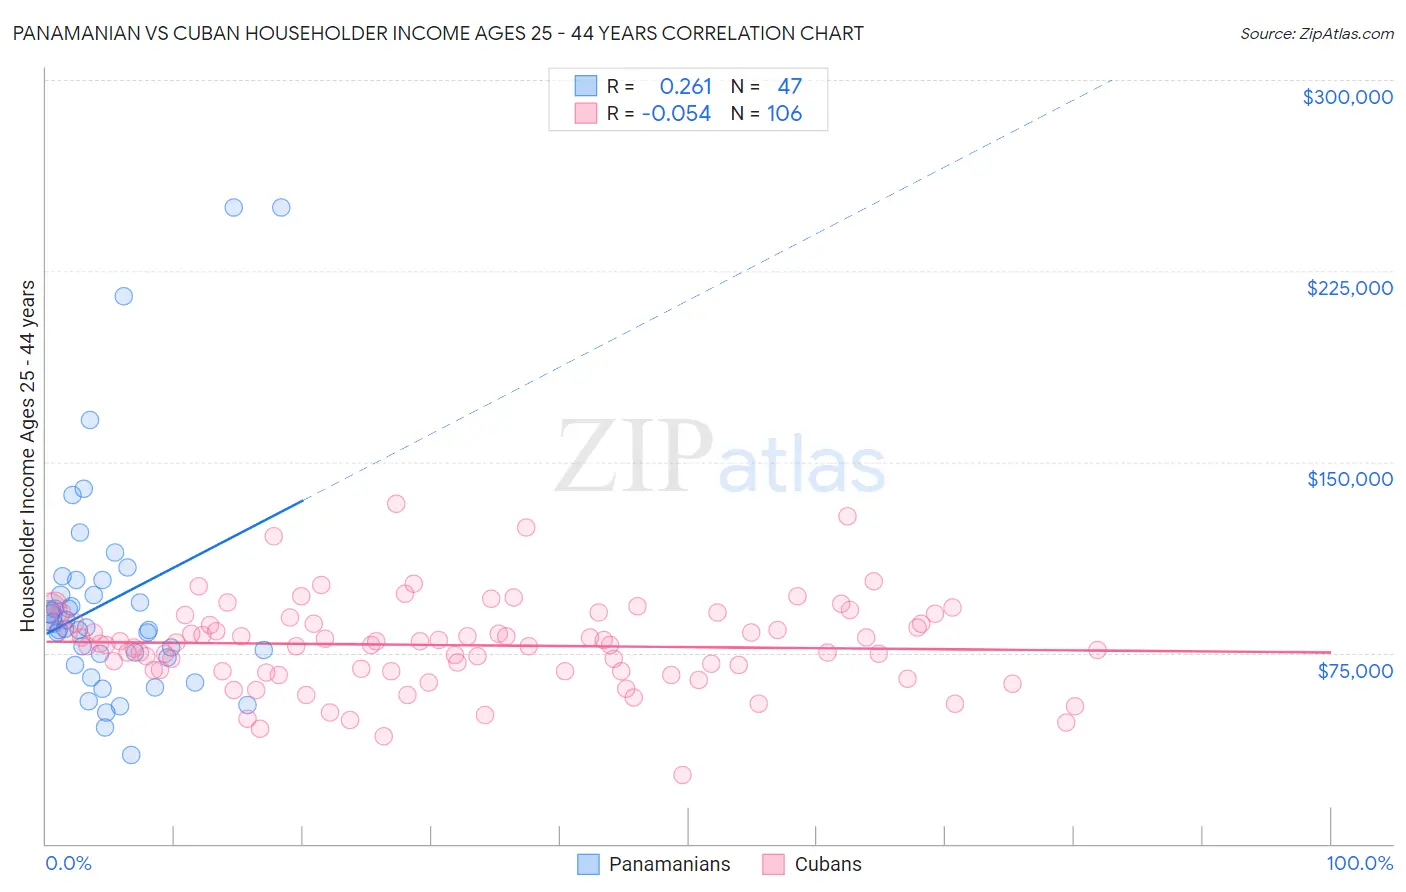 Panamanian vs Cuban Householder Income Ages 25 - 44 years